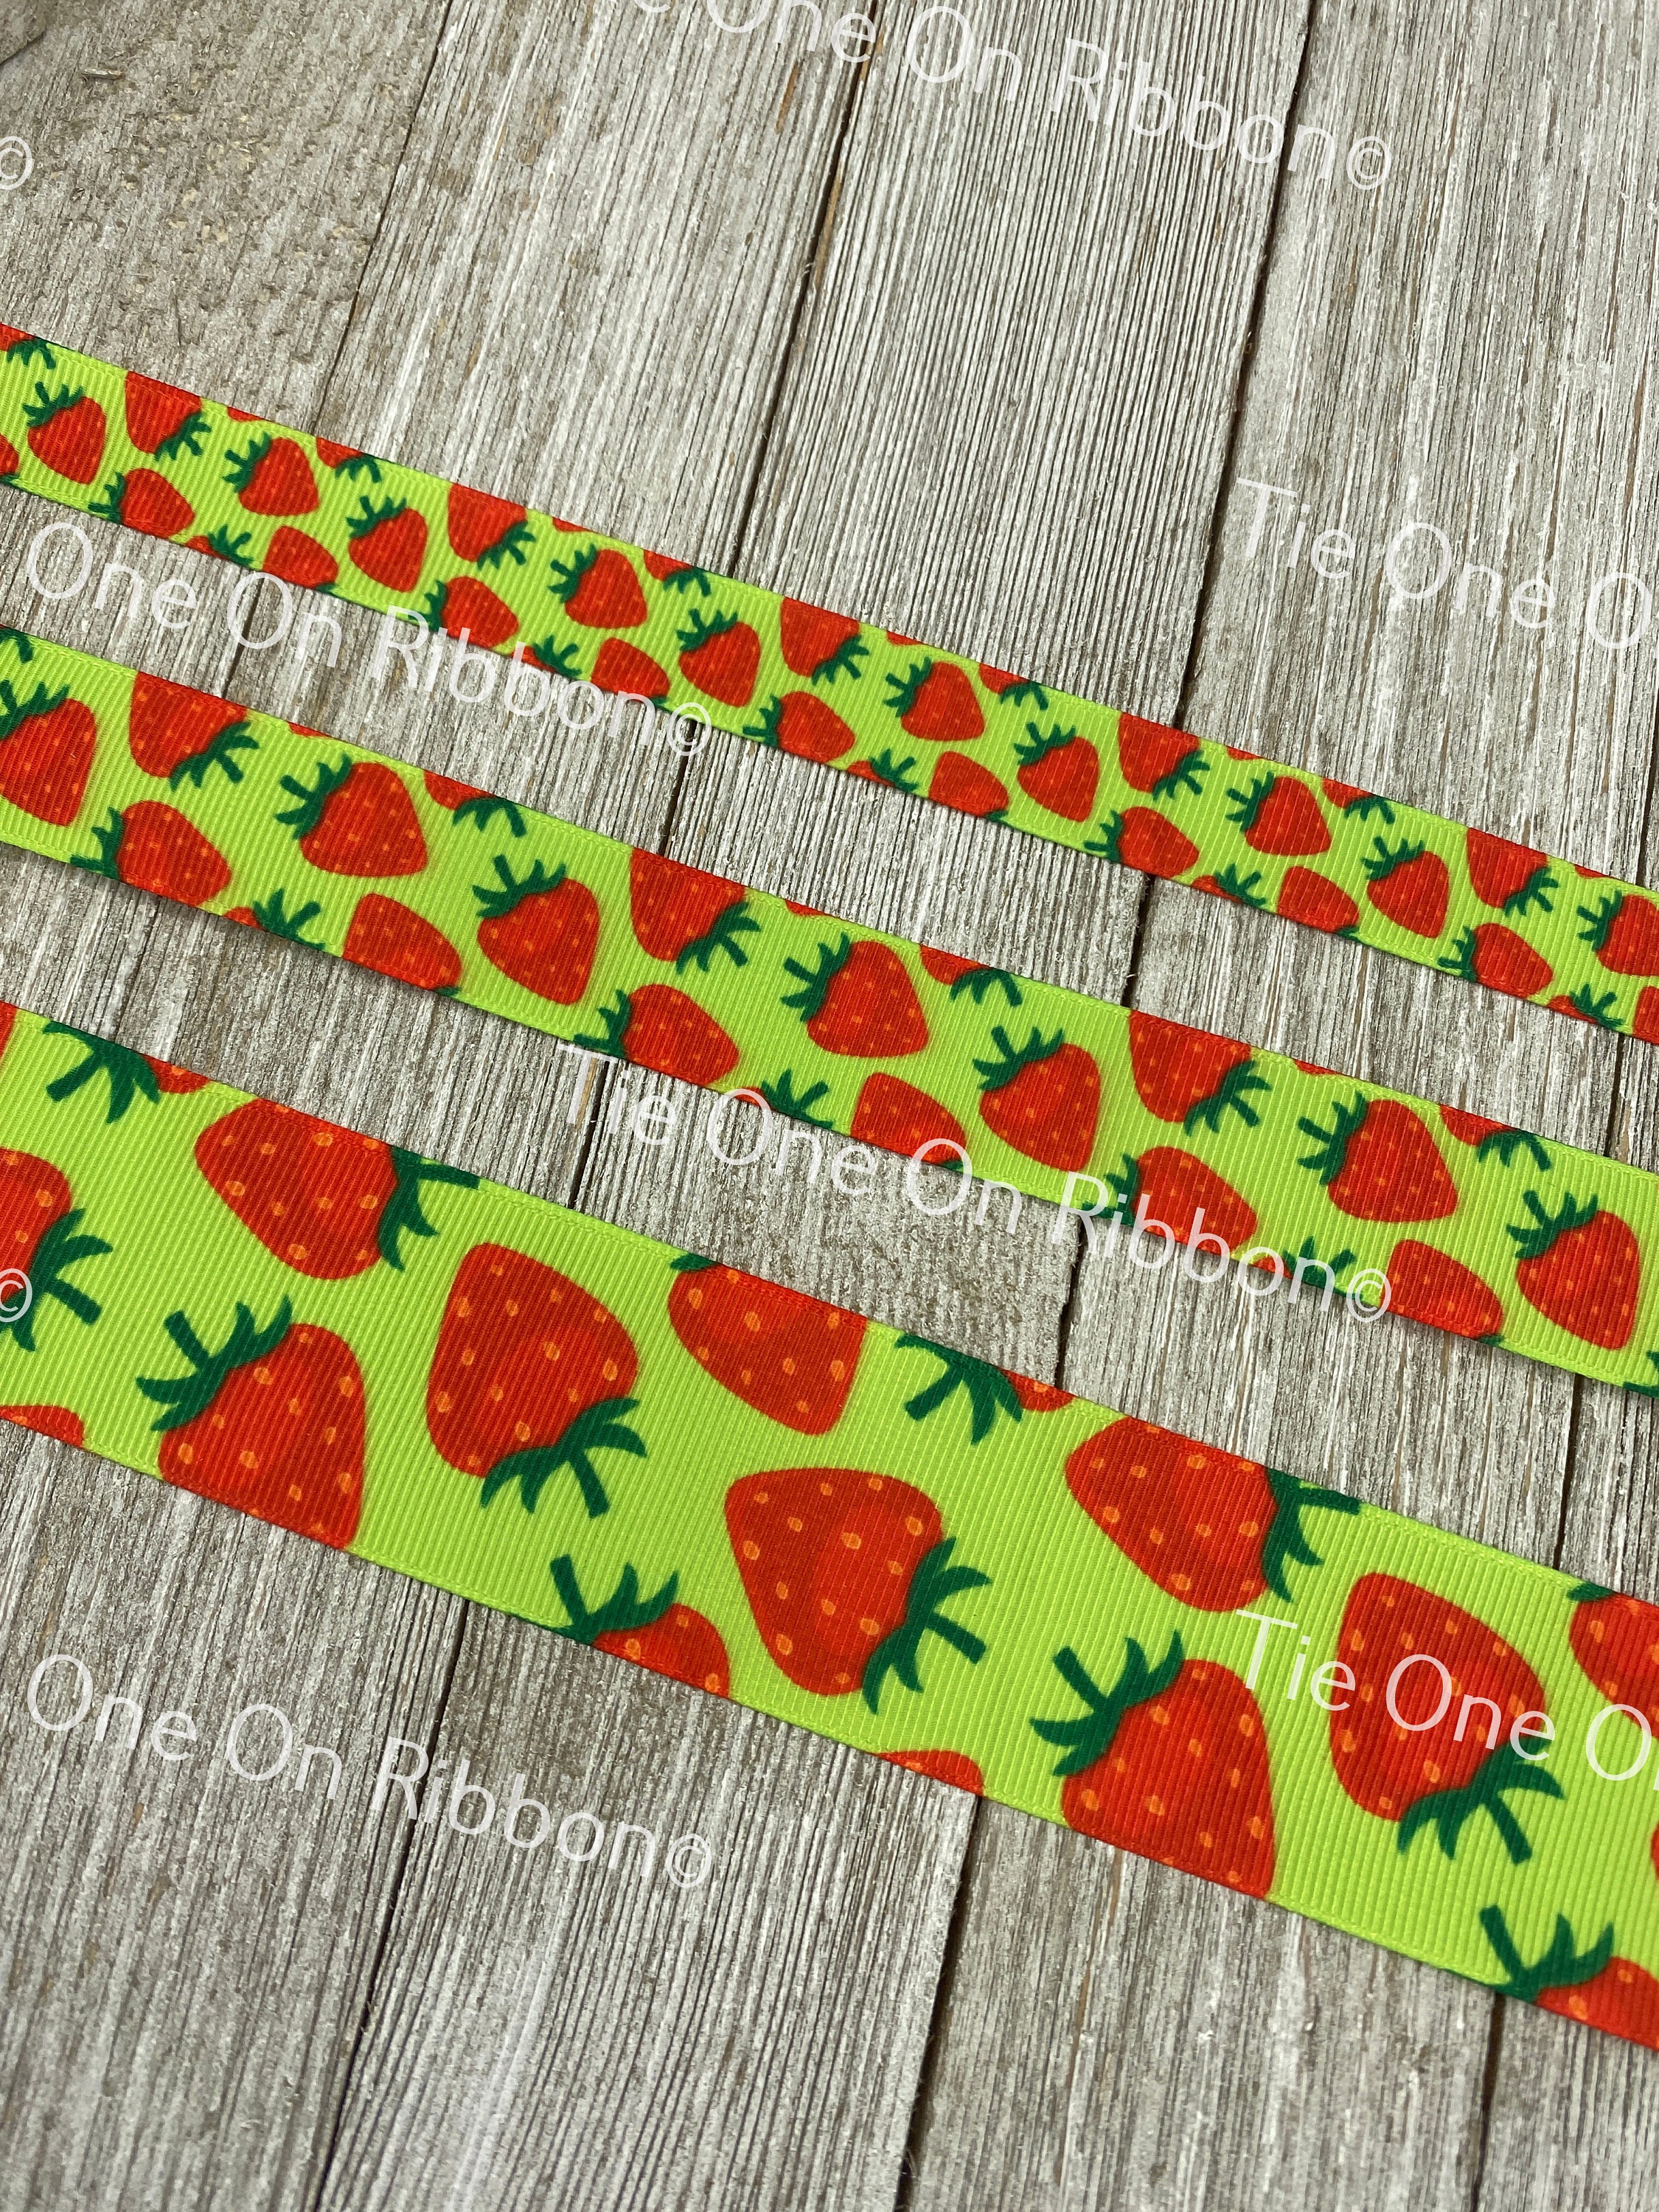 Strawberry Ribbon Decorative Fruit Printed Grosgrain Ribbon Green Red  Ribbon for Crafts 3/8 inch x 5 Yards Assorted Ribbon